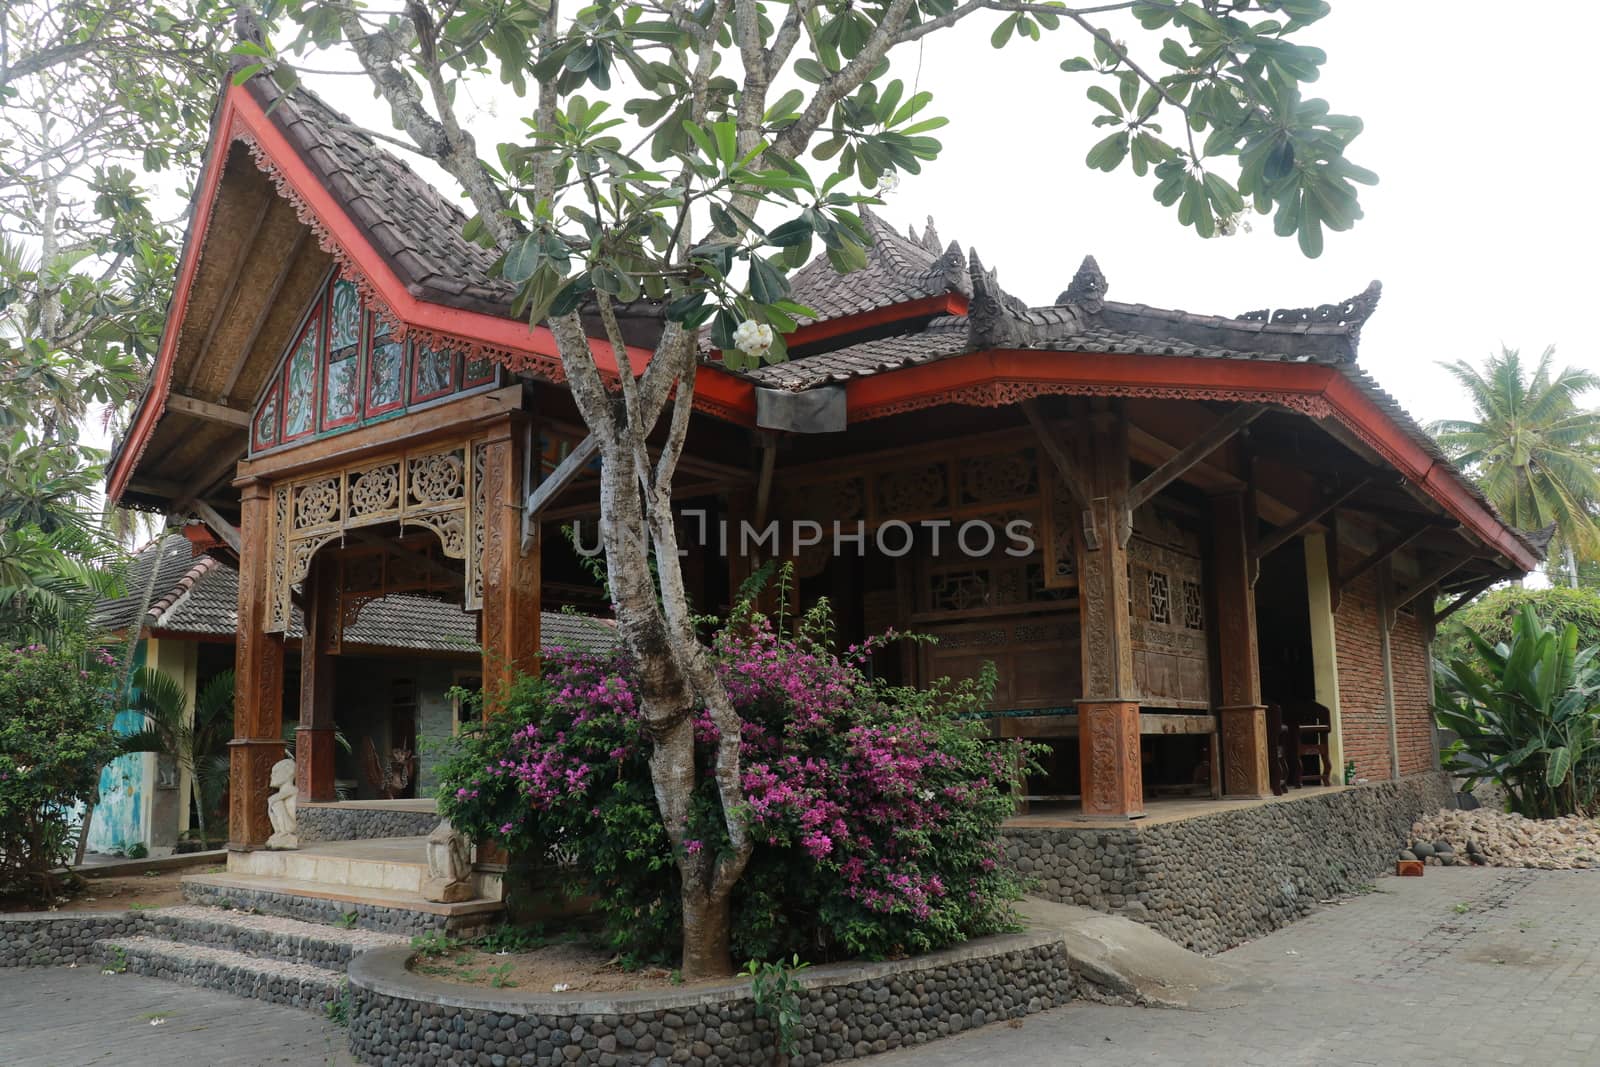 One of the traditional houses that is still preserved in the village. Traditional wooden house in a tropical garden on Lombok island, Indonesia.